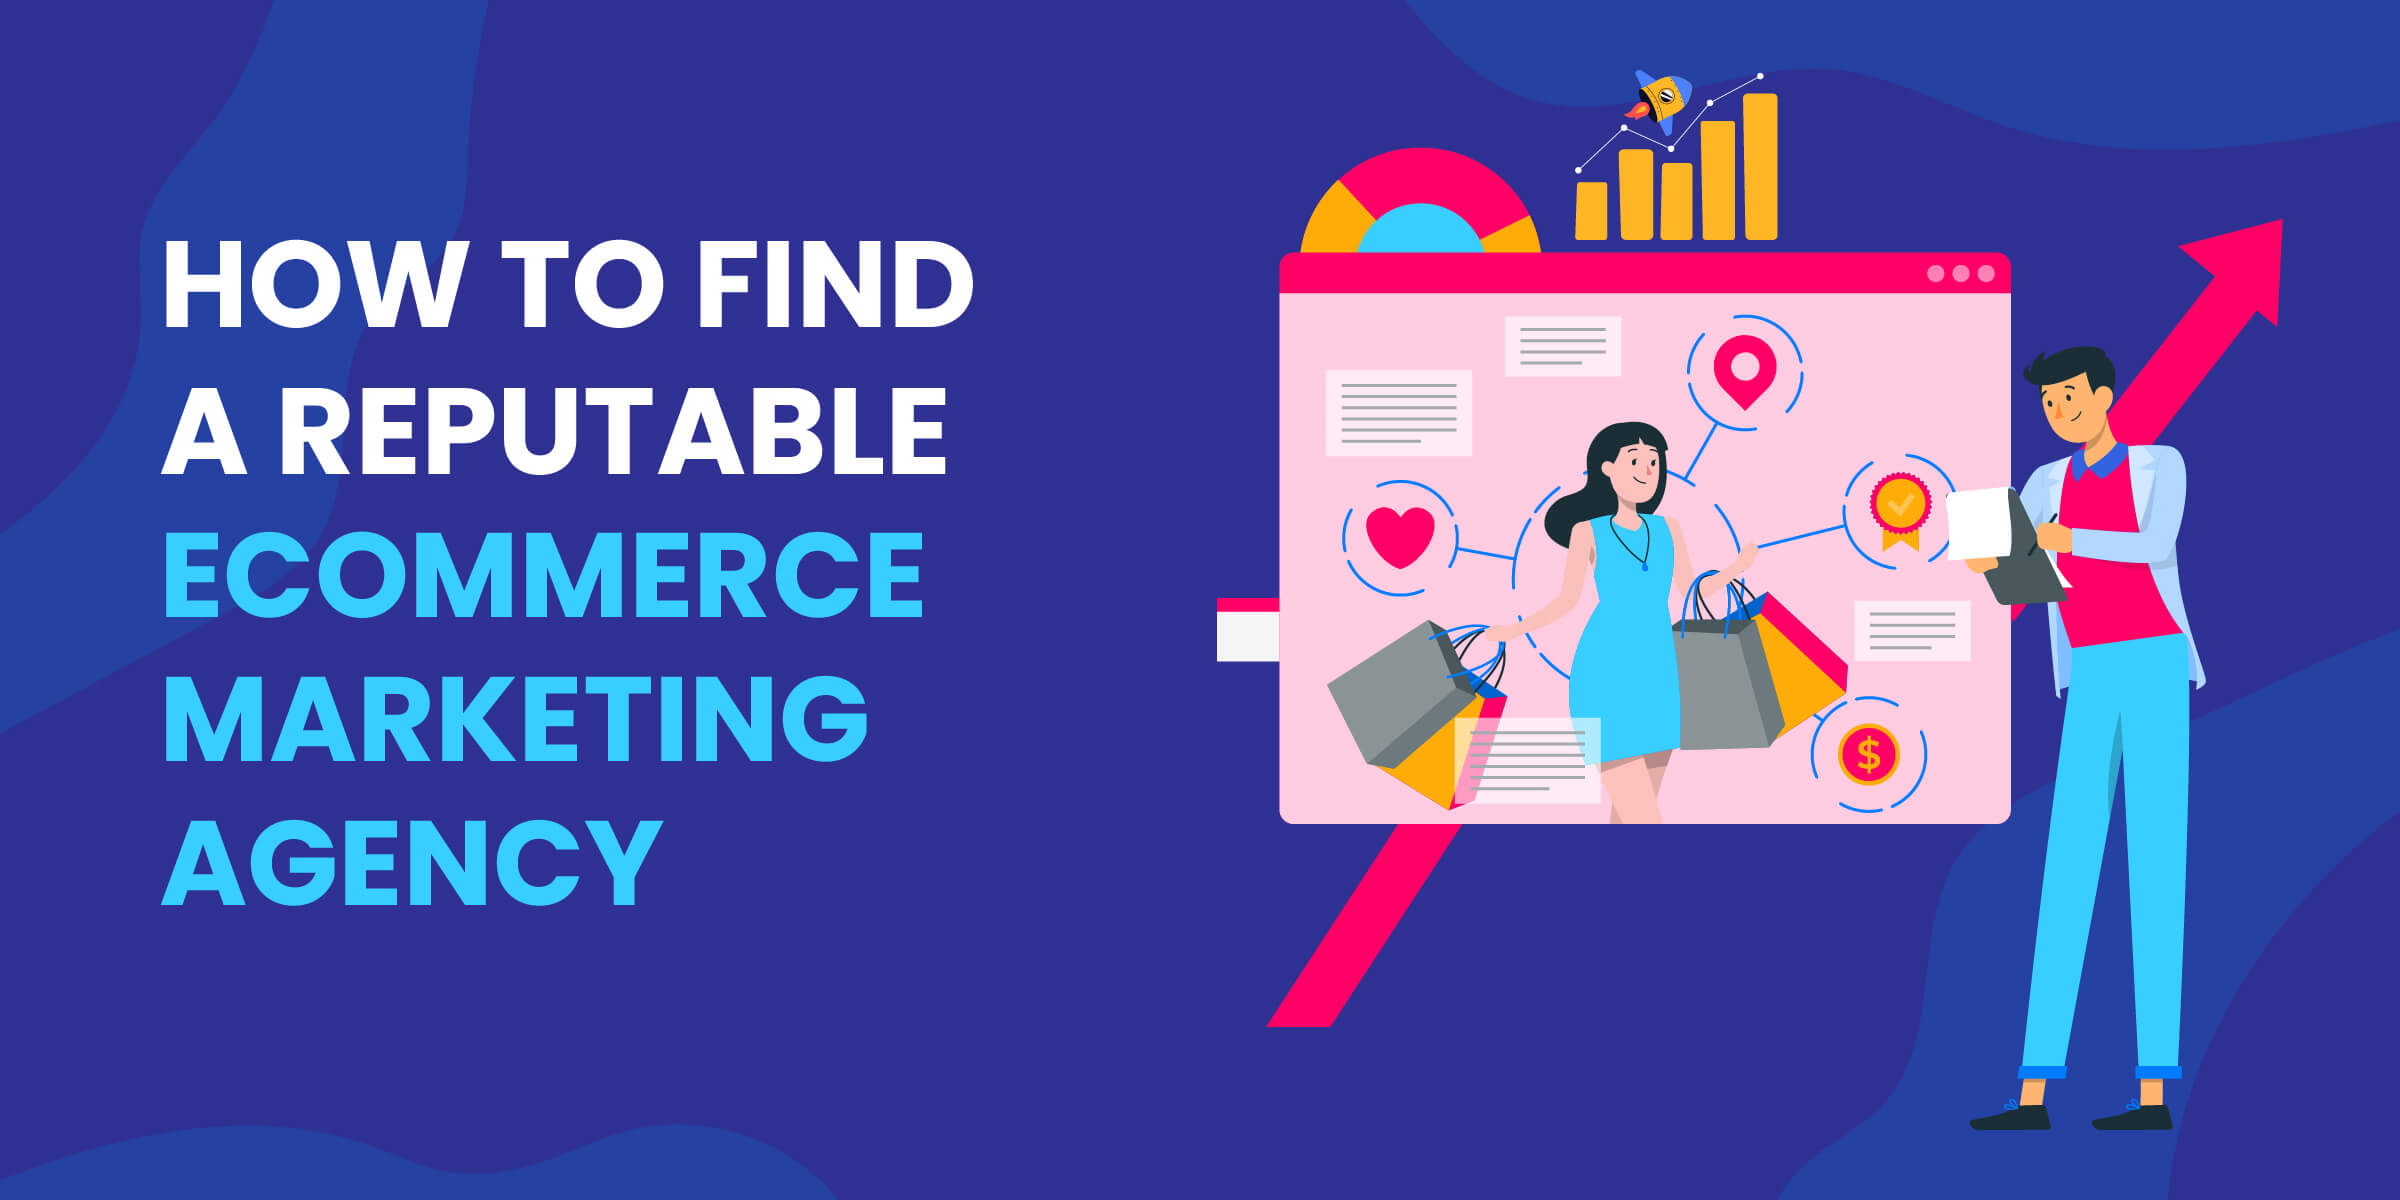 How to Find eCommerce Agency